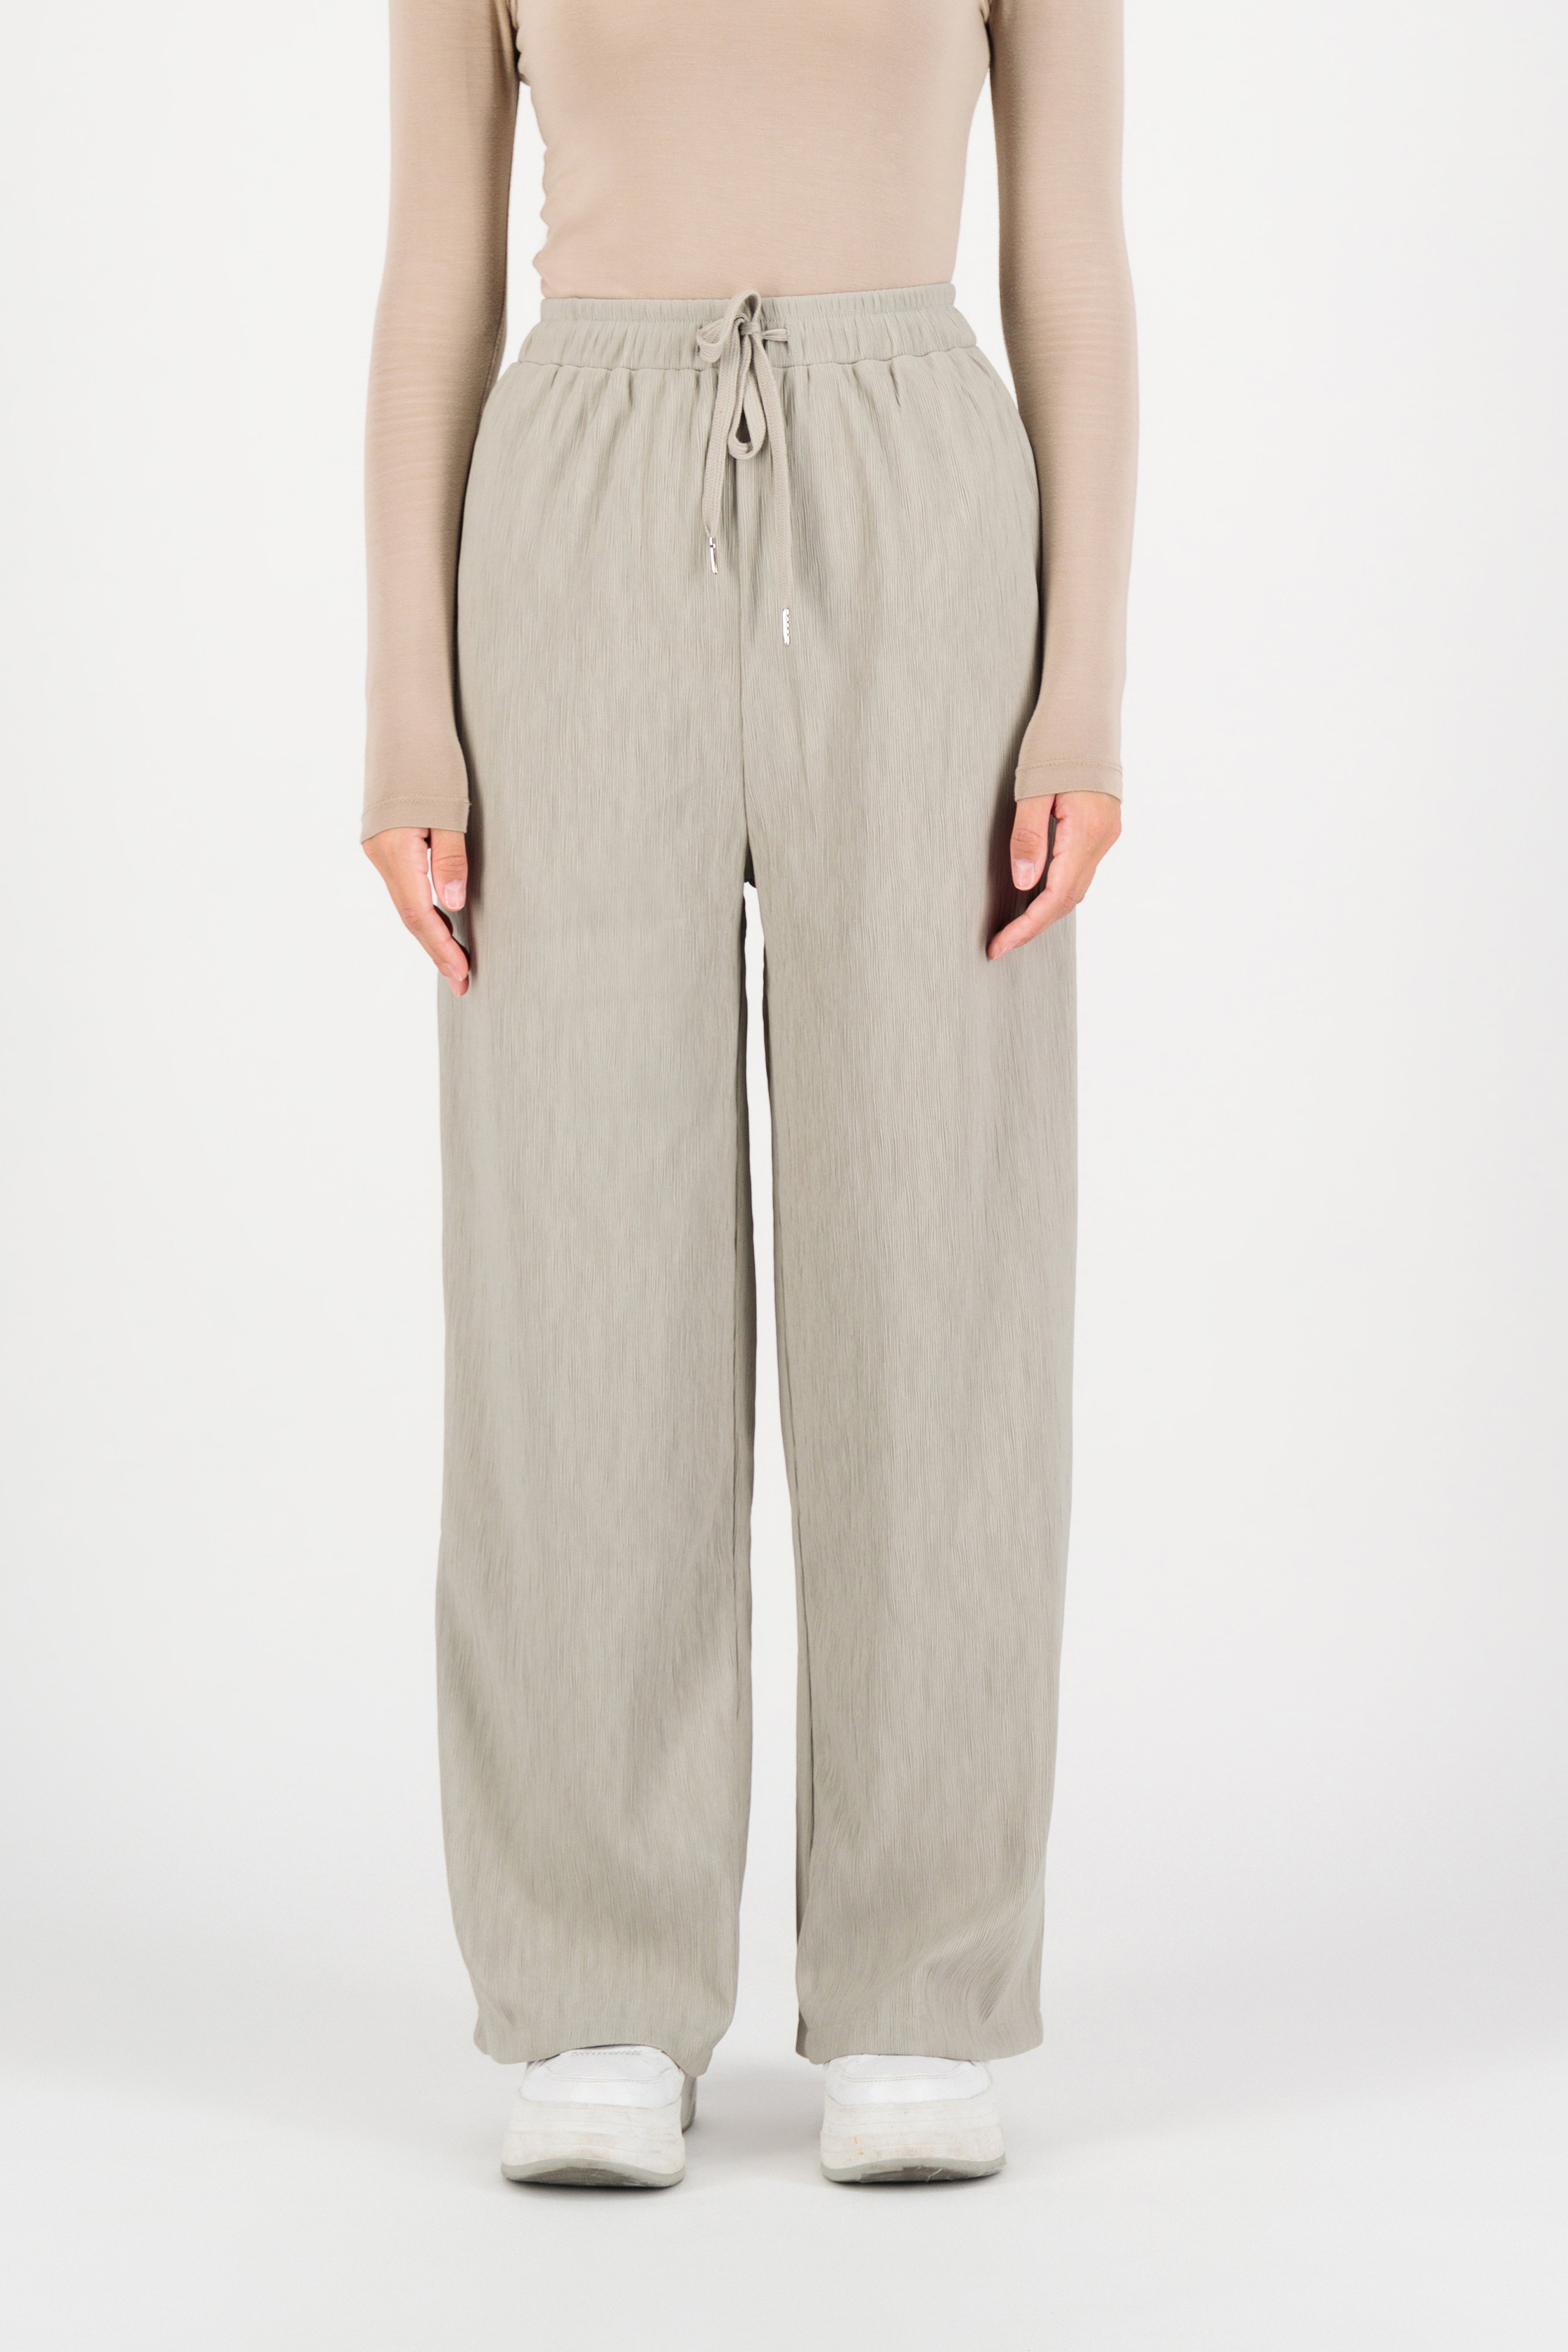 CA - Wavy Relaxed-Fit Pants - Mist